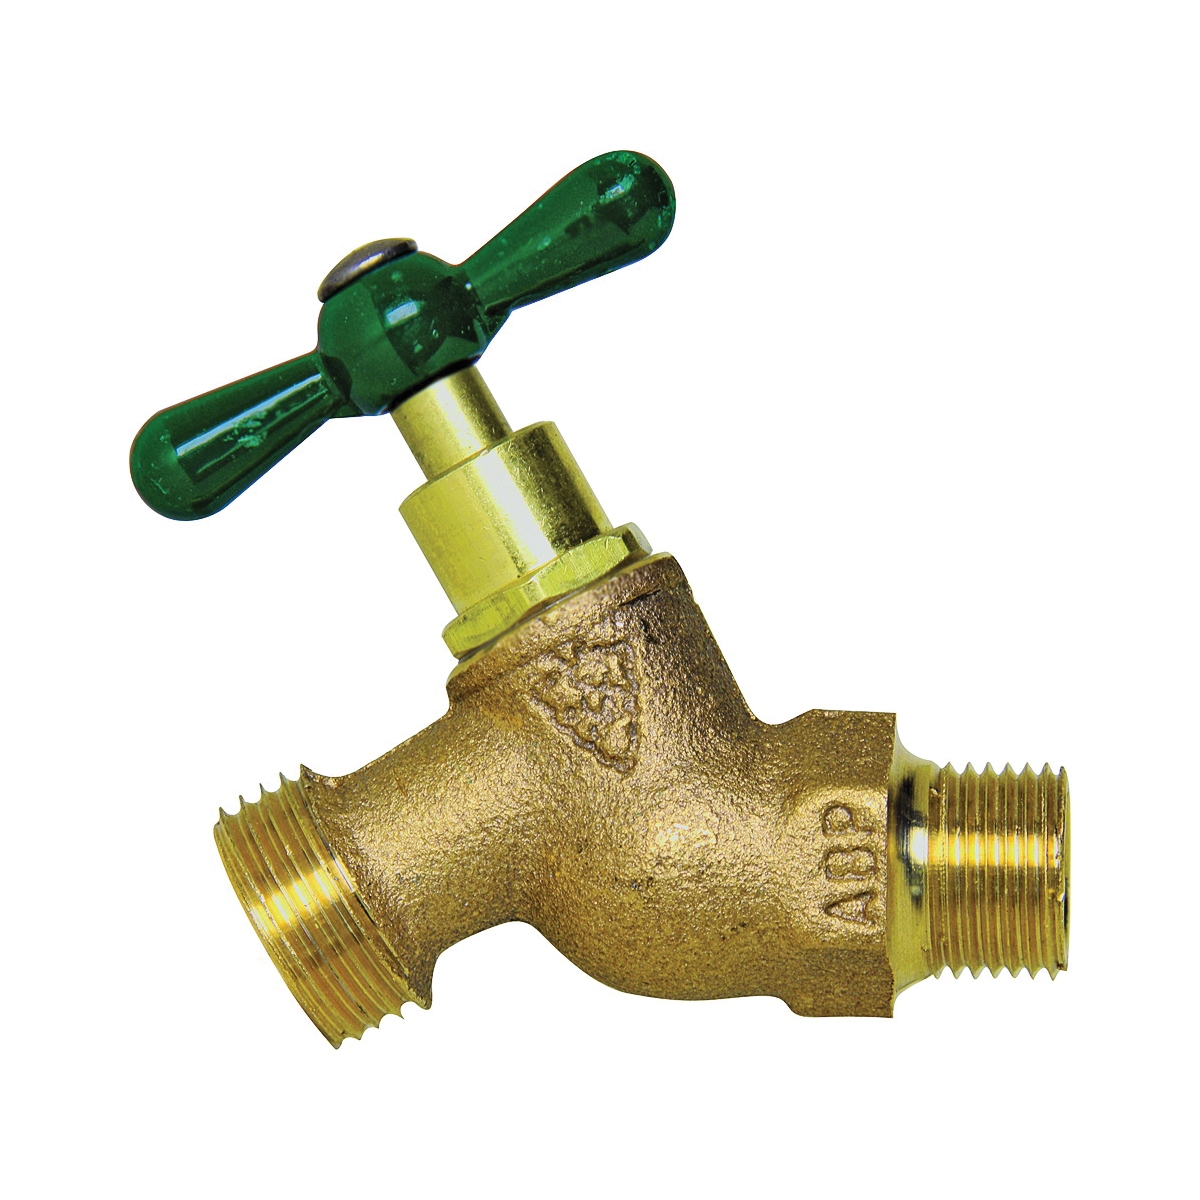 arrowhead 351BCLD Hose Bibb, 3/4 x 3/4 in Connection, MIP x Hose, 8 to 9 gpm, 125 psi Pressure, Brass Body, Rough